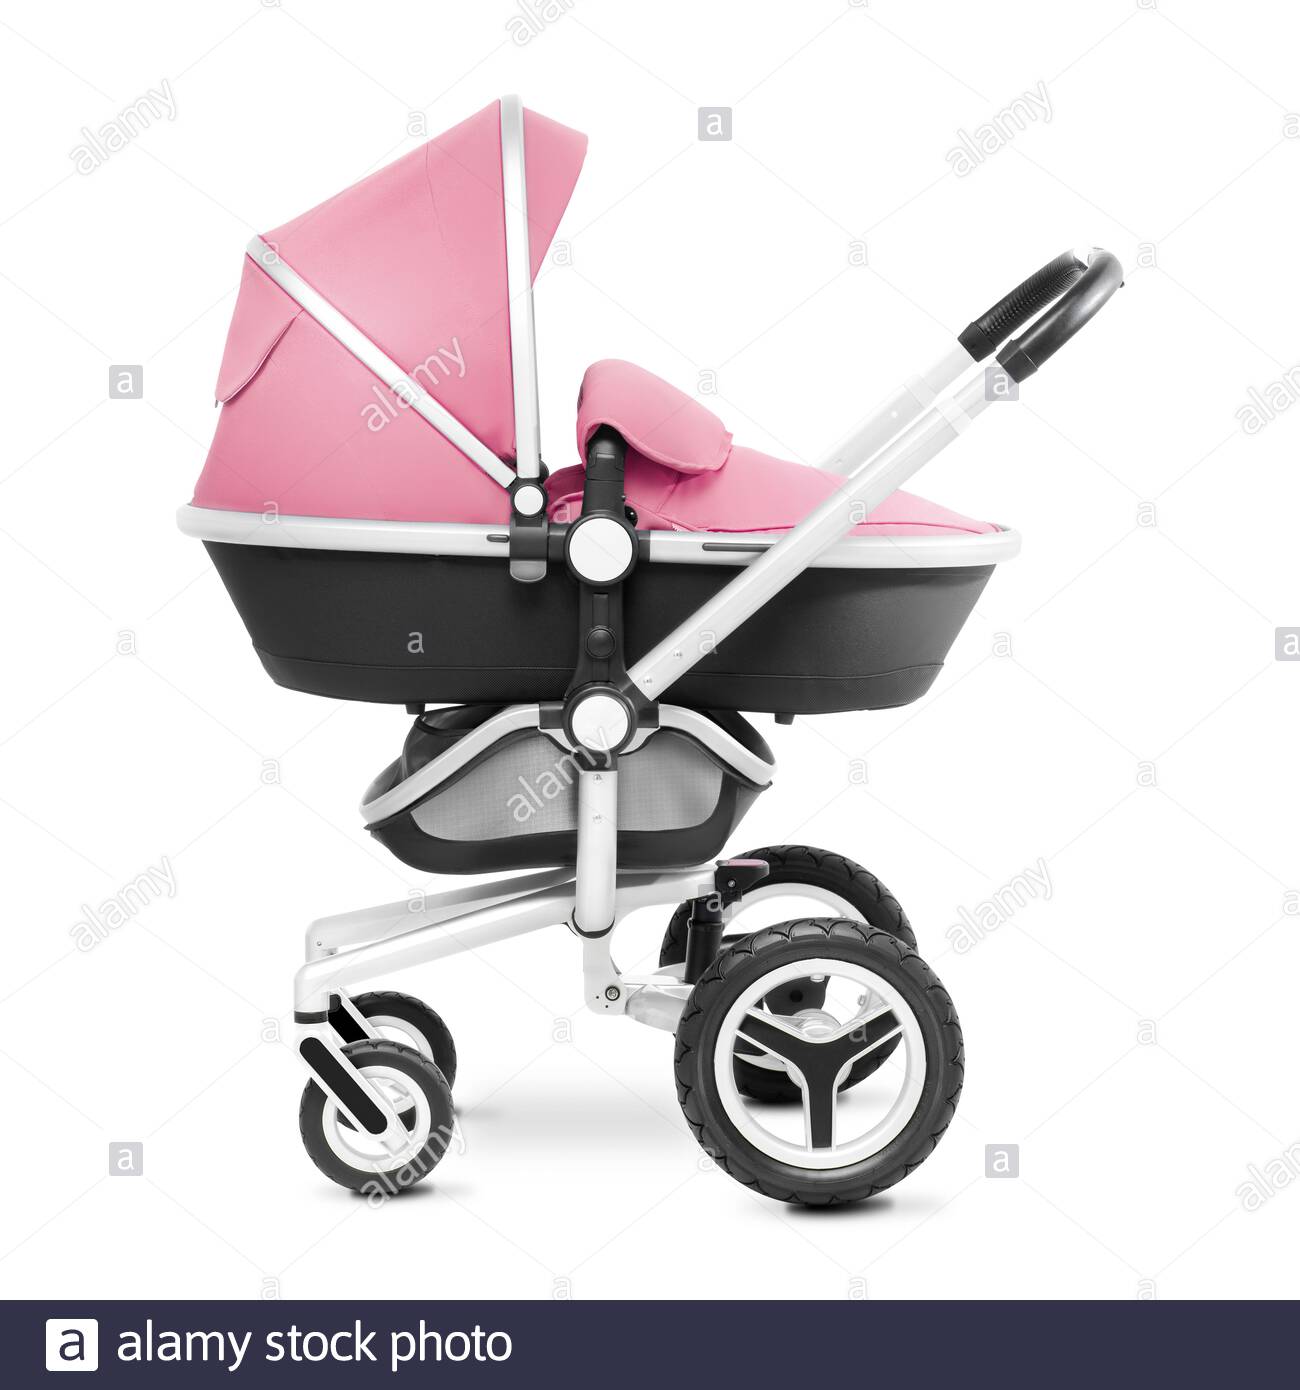 carrycot on wheels